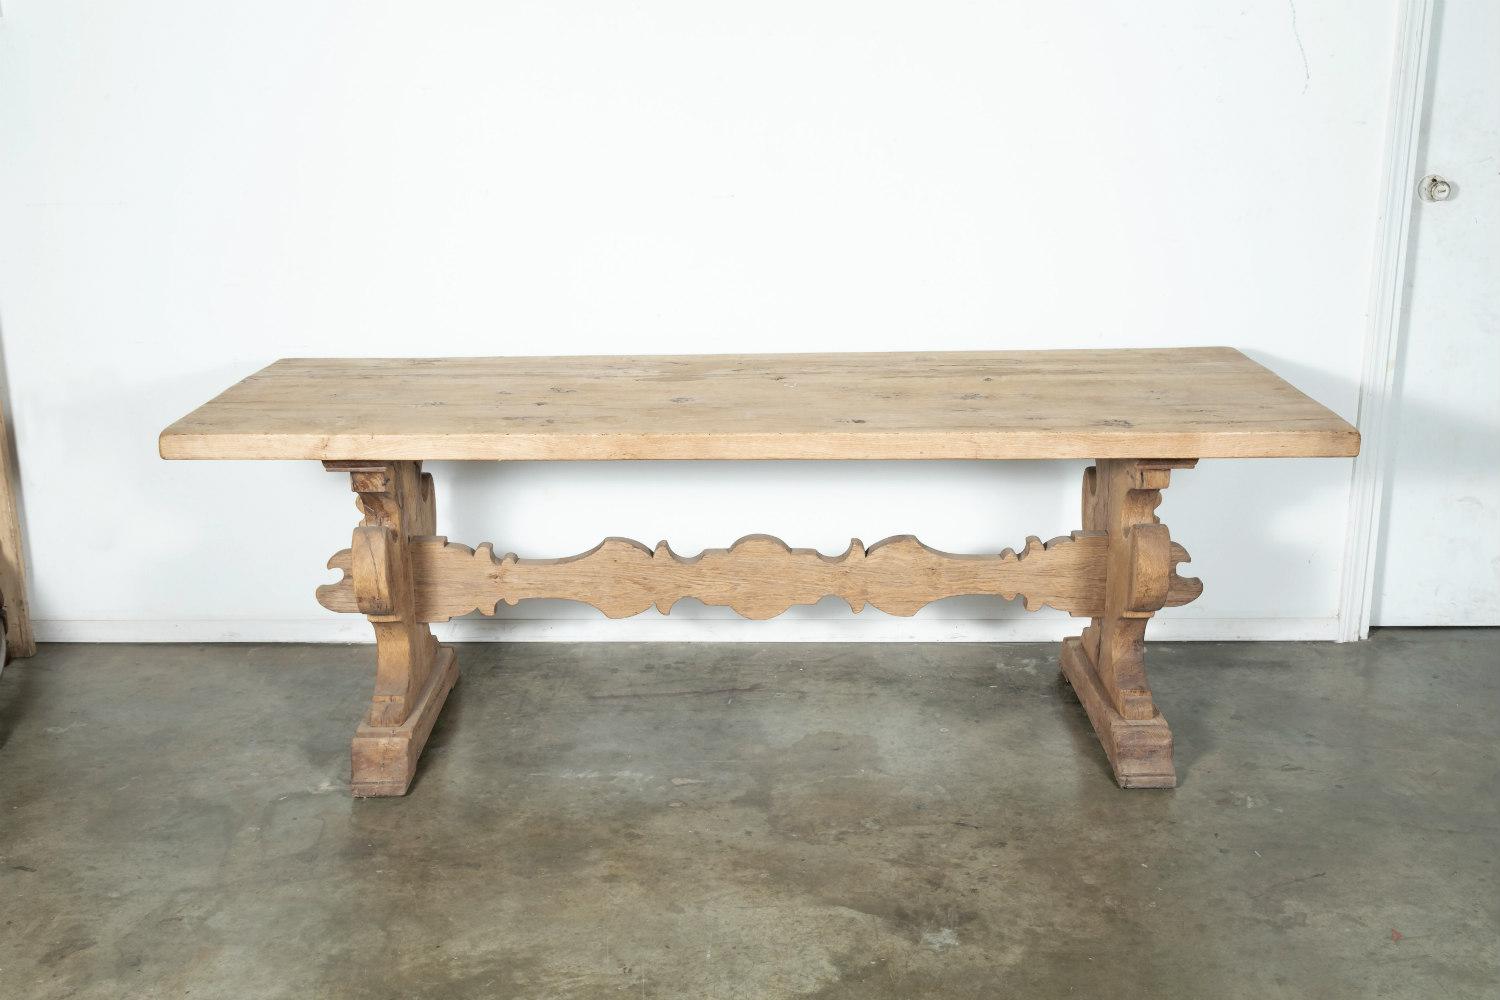 A handsome 19th century solid chestnut Baroque style bleached trestle farm house table handcrafted in the Tuscany region having a rectangular plank top raised by two thick carved urn shaped supports resting on plinth bases joined by an impressive